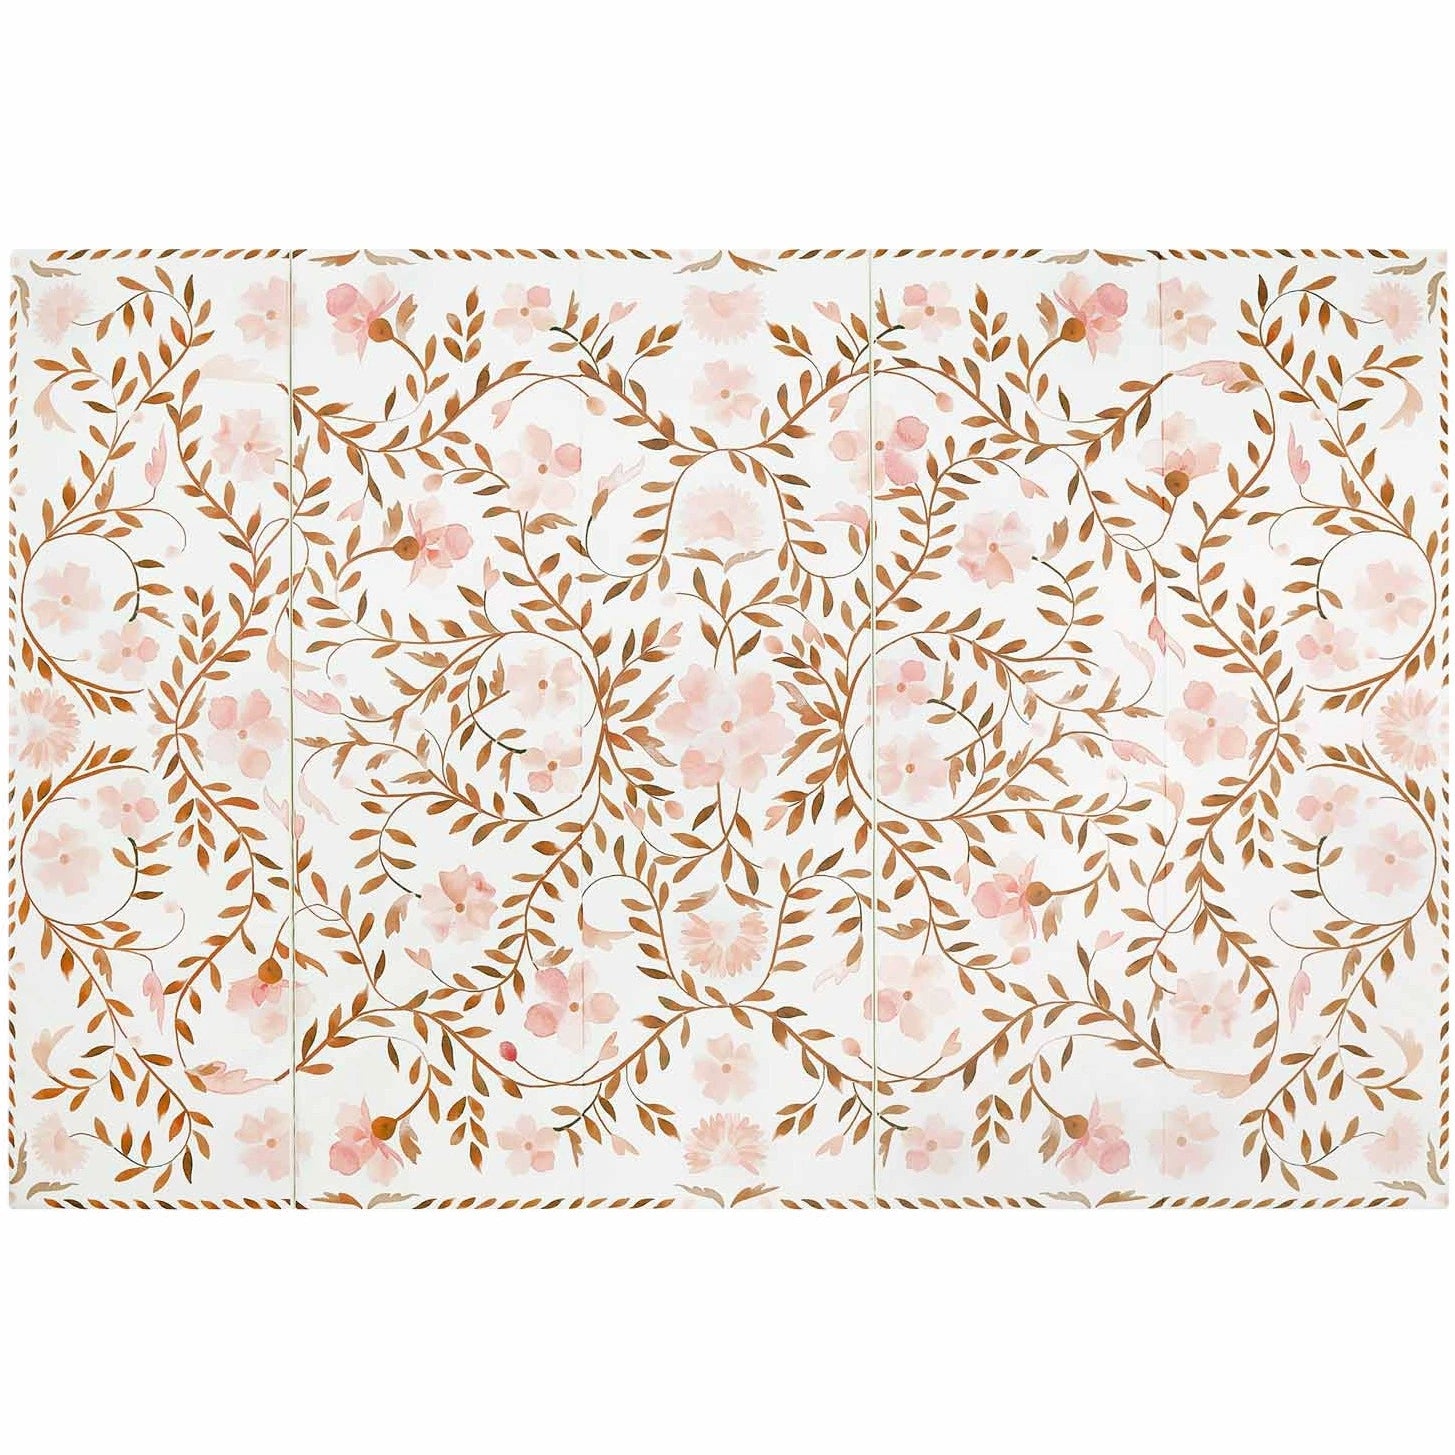 Overhead image of size 5x7.5 Faye Apricot pink and brown floral print tumbling mat